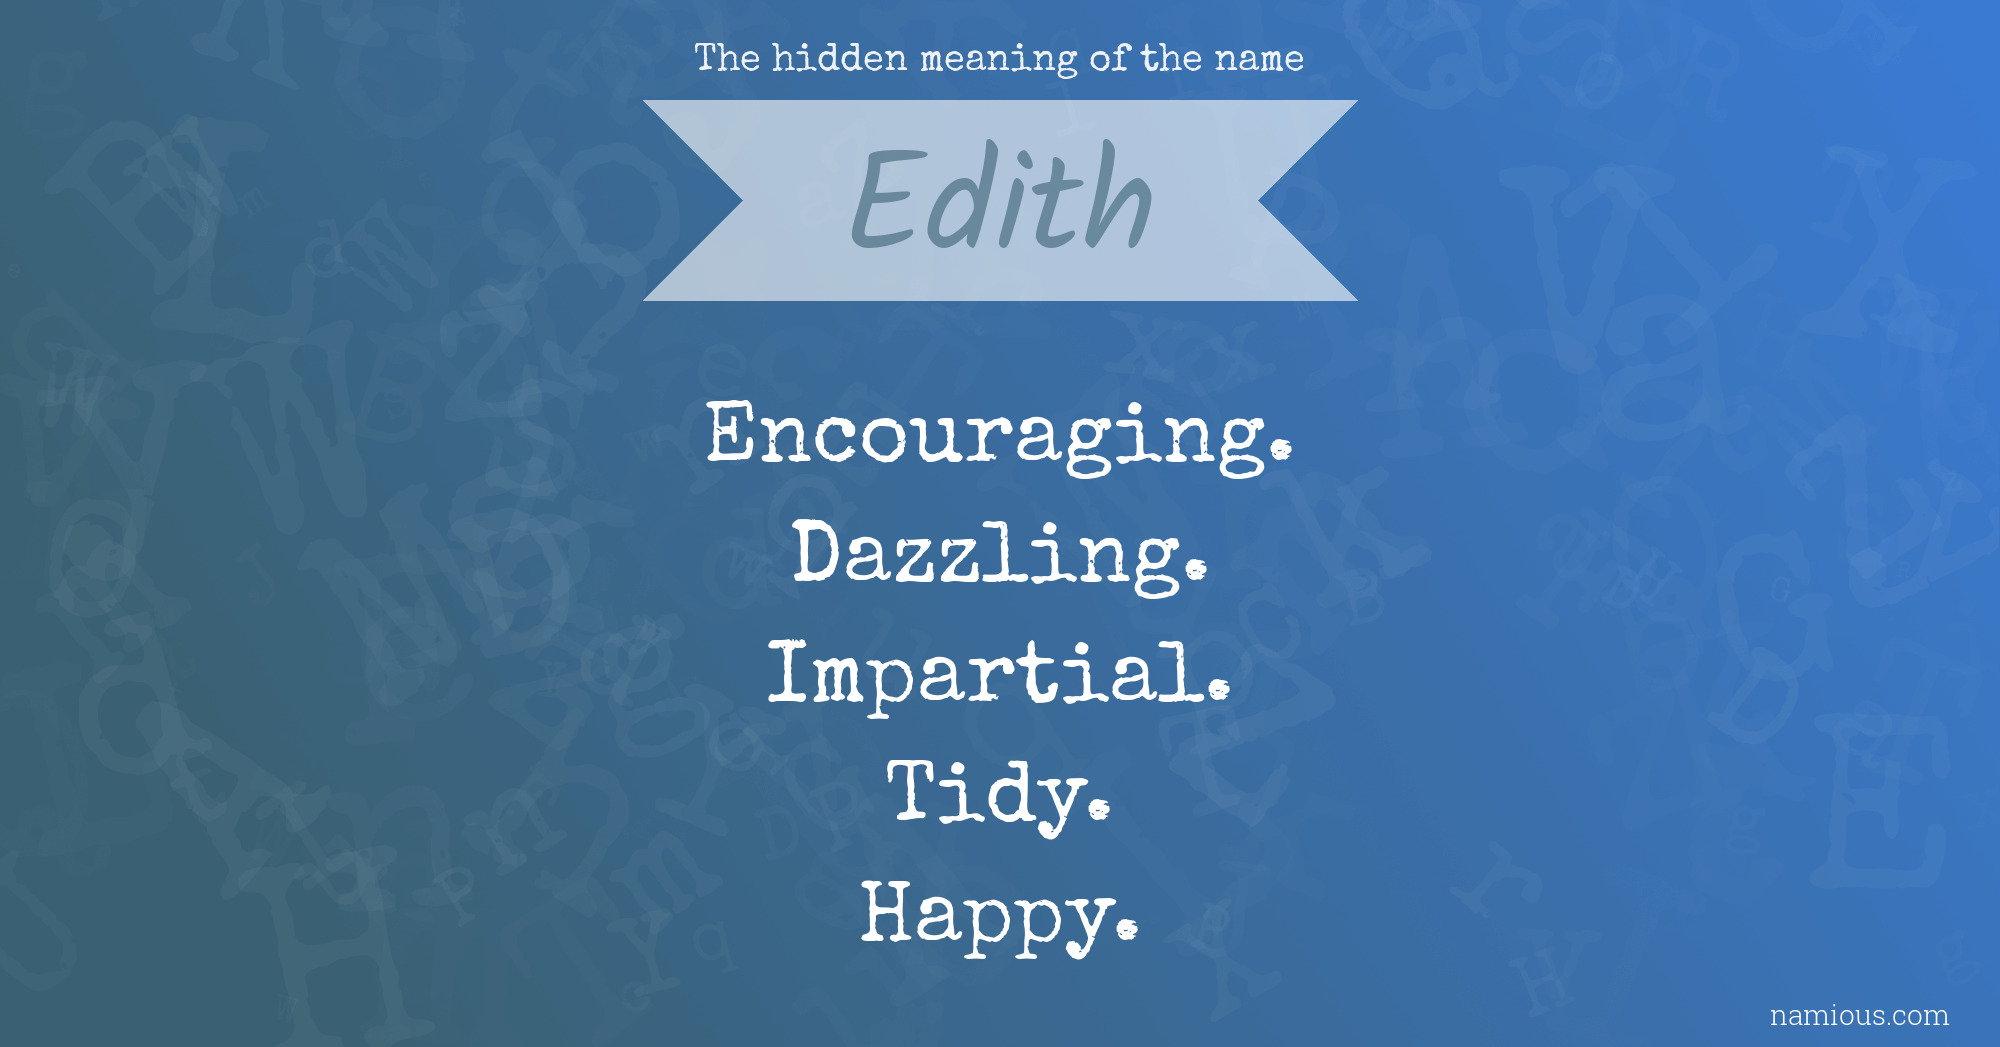 Meaning edith Meaning of